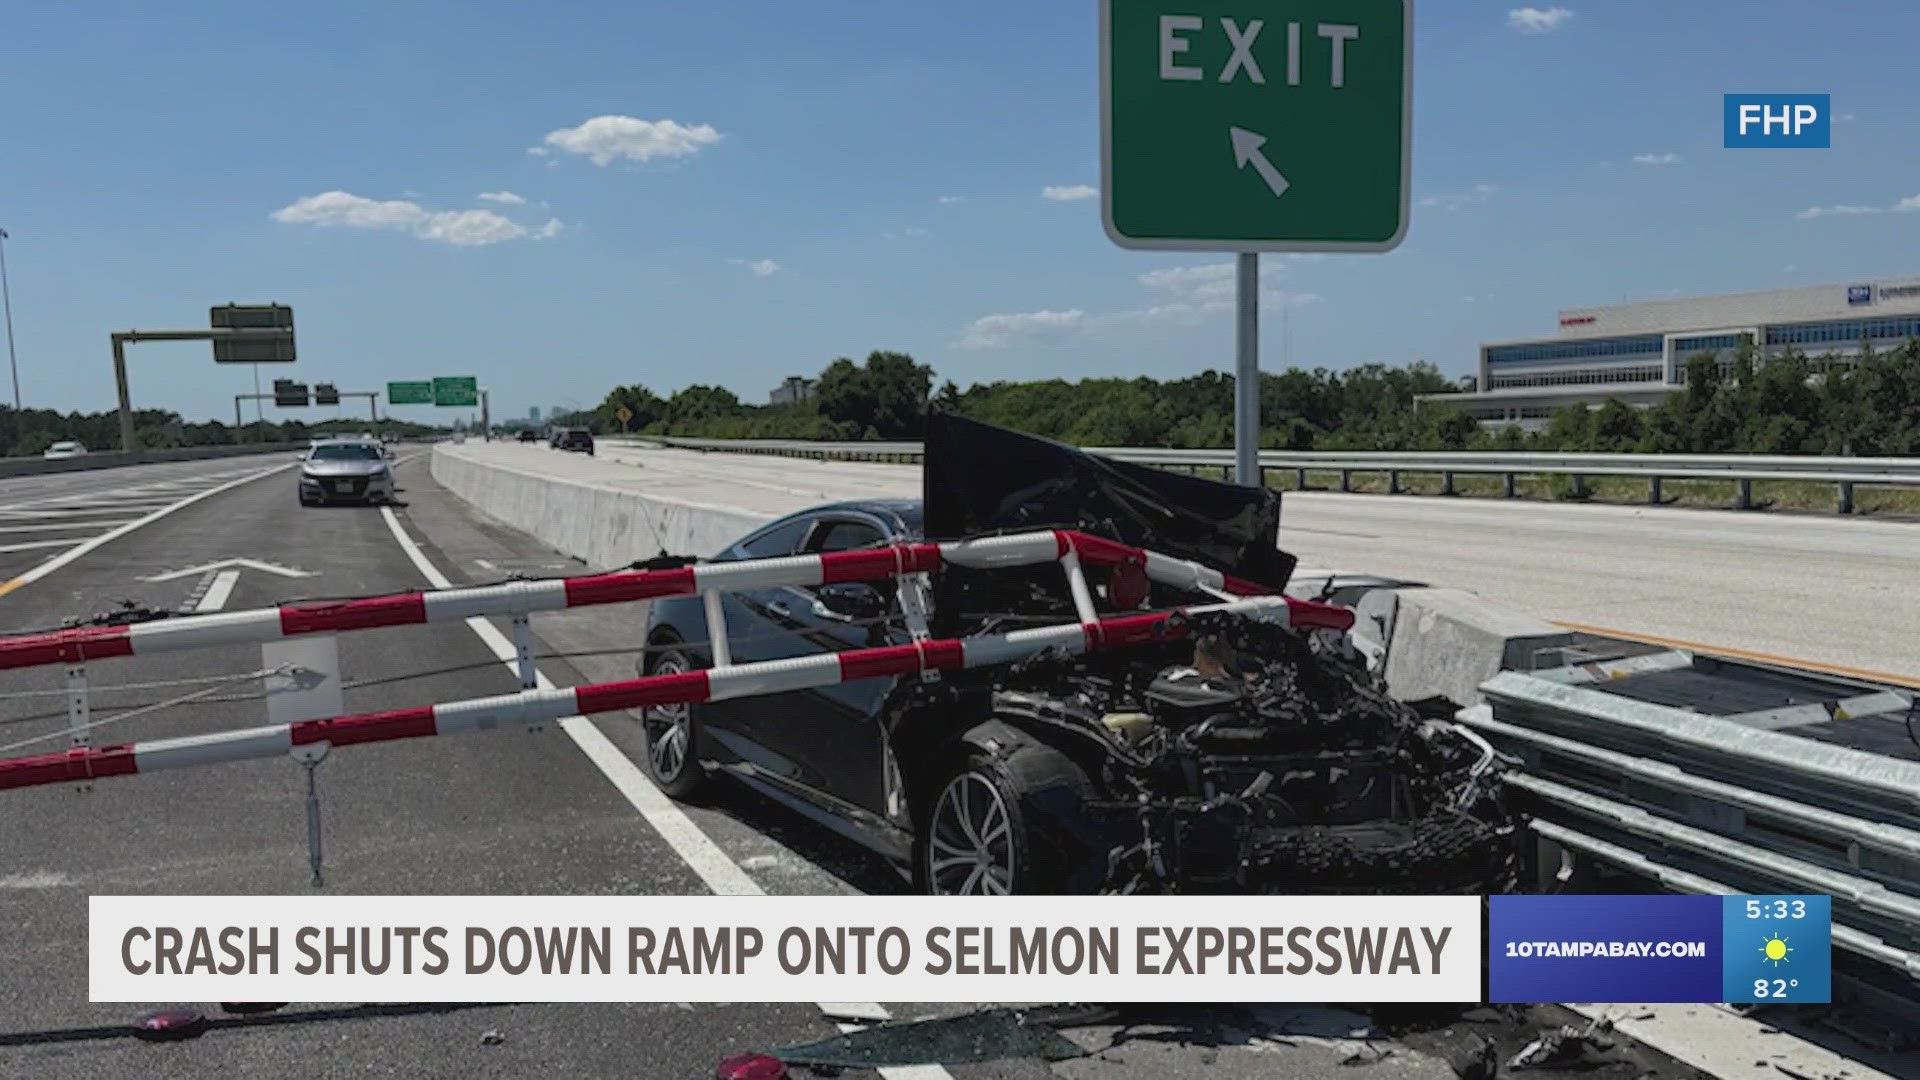 Florida Highway Patrol said the 55-year-old man lost control of the car, making the vehicle go through the first barrier arm and sideswipe the concrete divider wall.